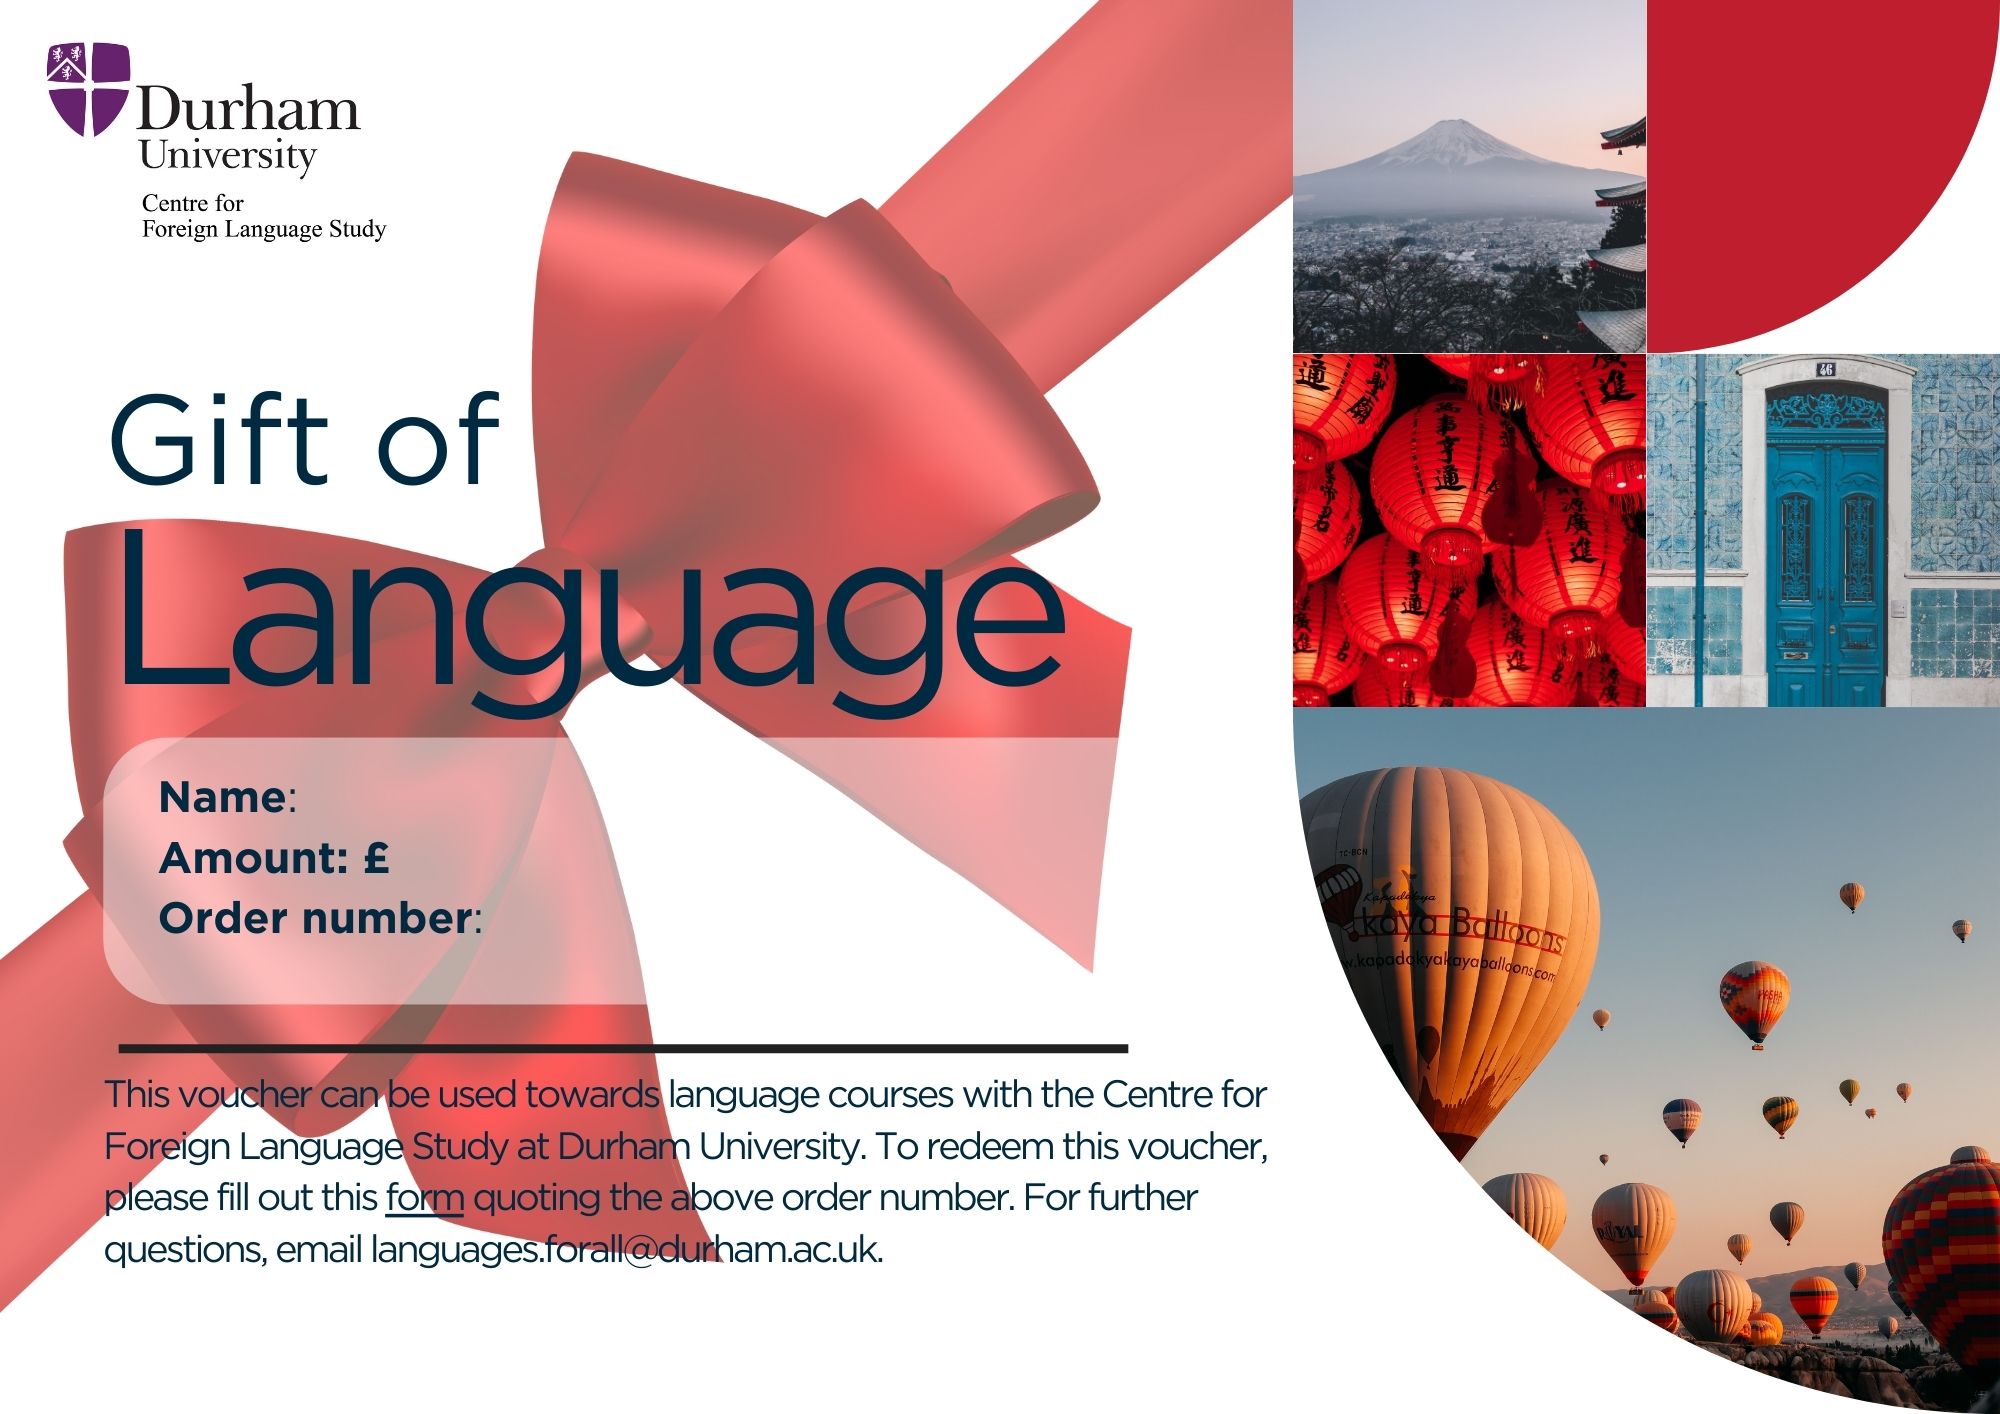 Example of gift voucher issued for language courses